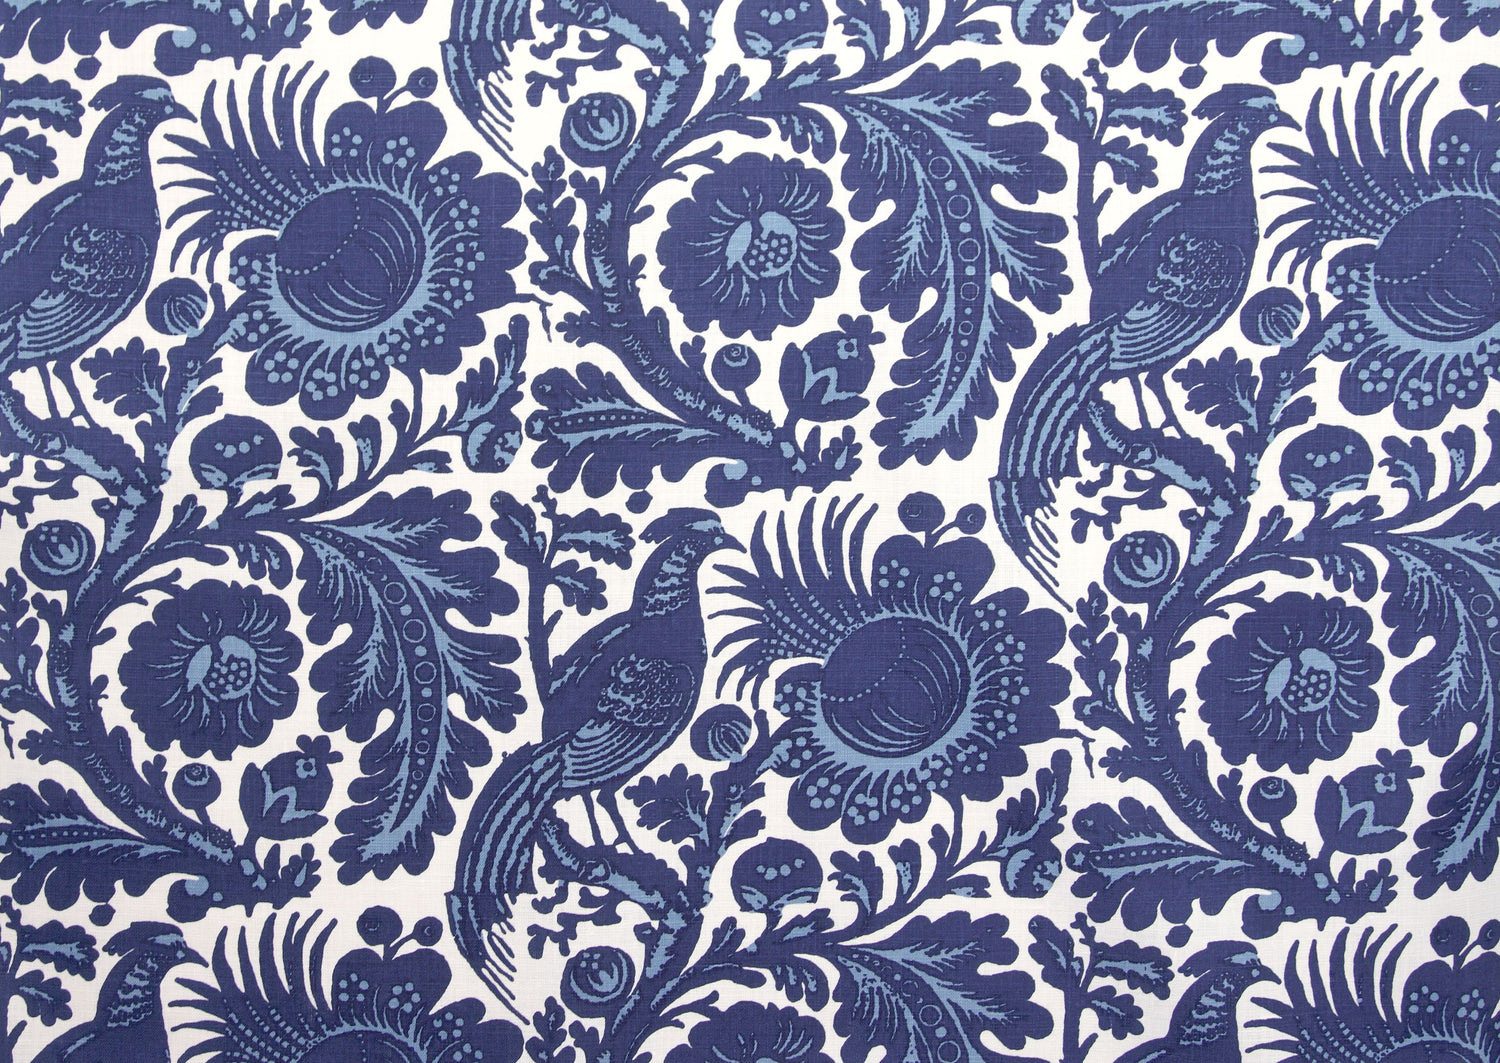 Resist Print fabric in light and dark blue on white color - pattern number SC 00016218M - by Scalamandre in the Scalamandre Fabrics Book 1 collection